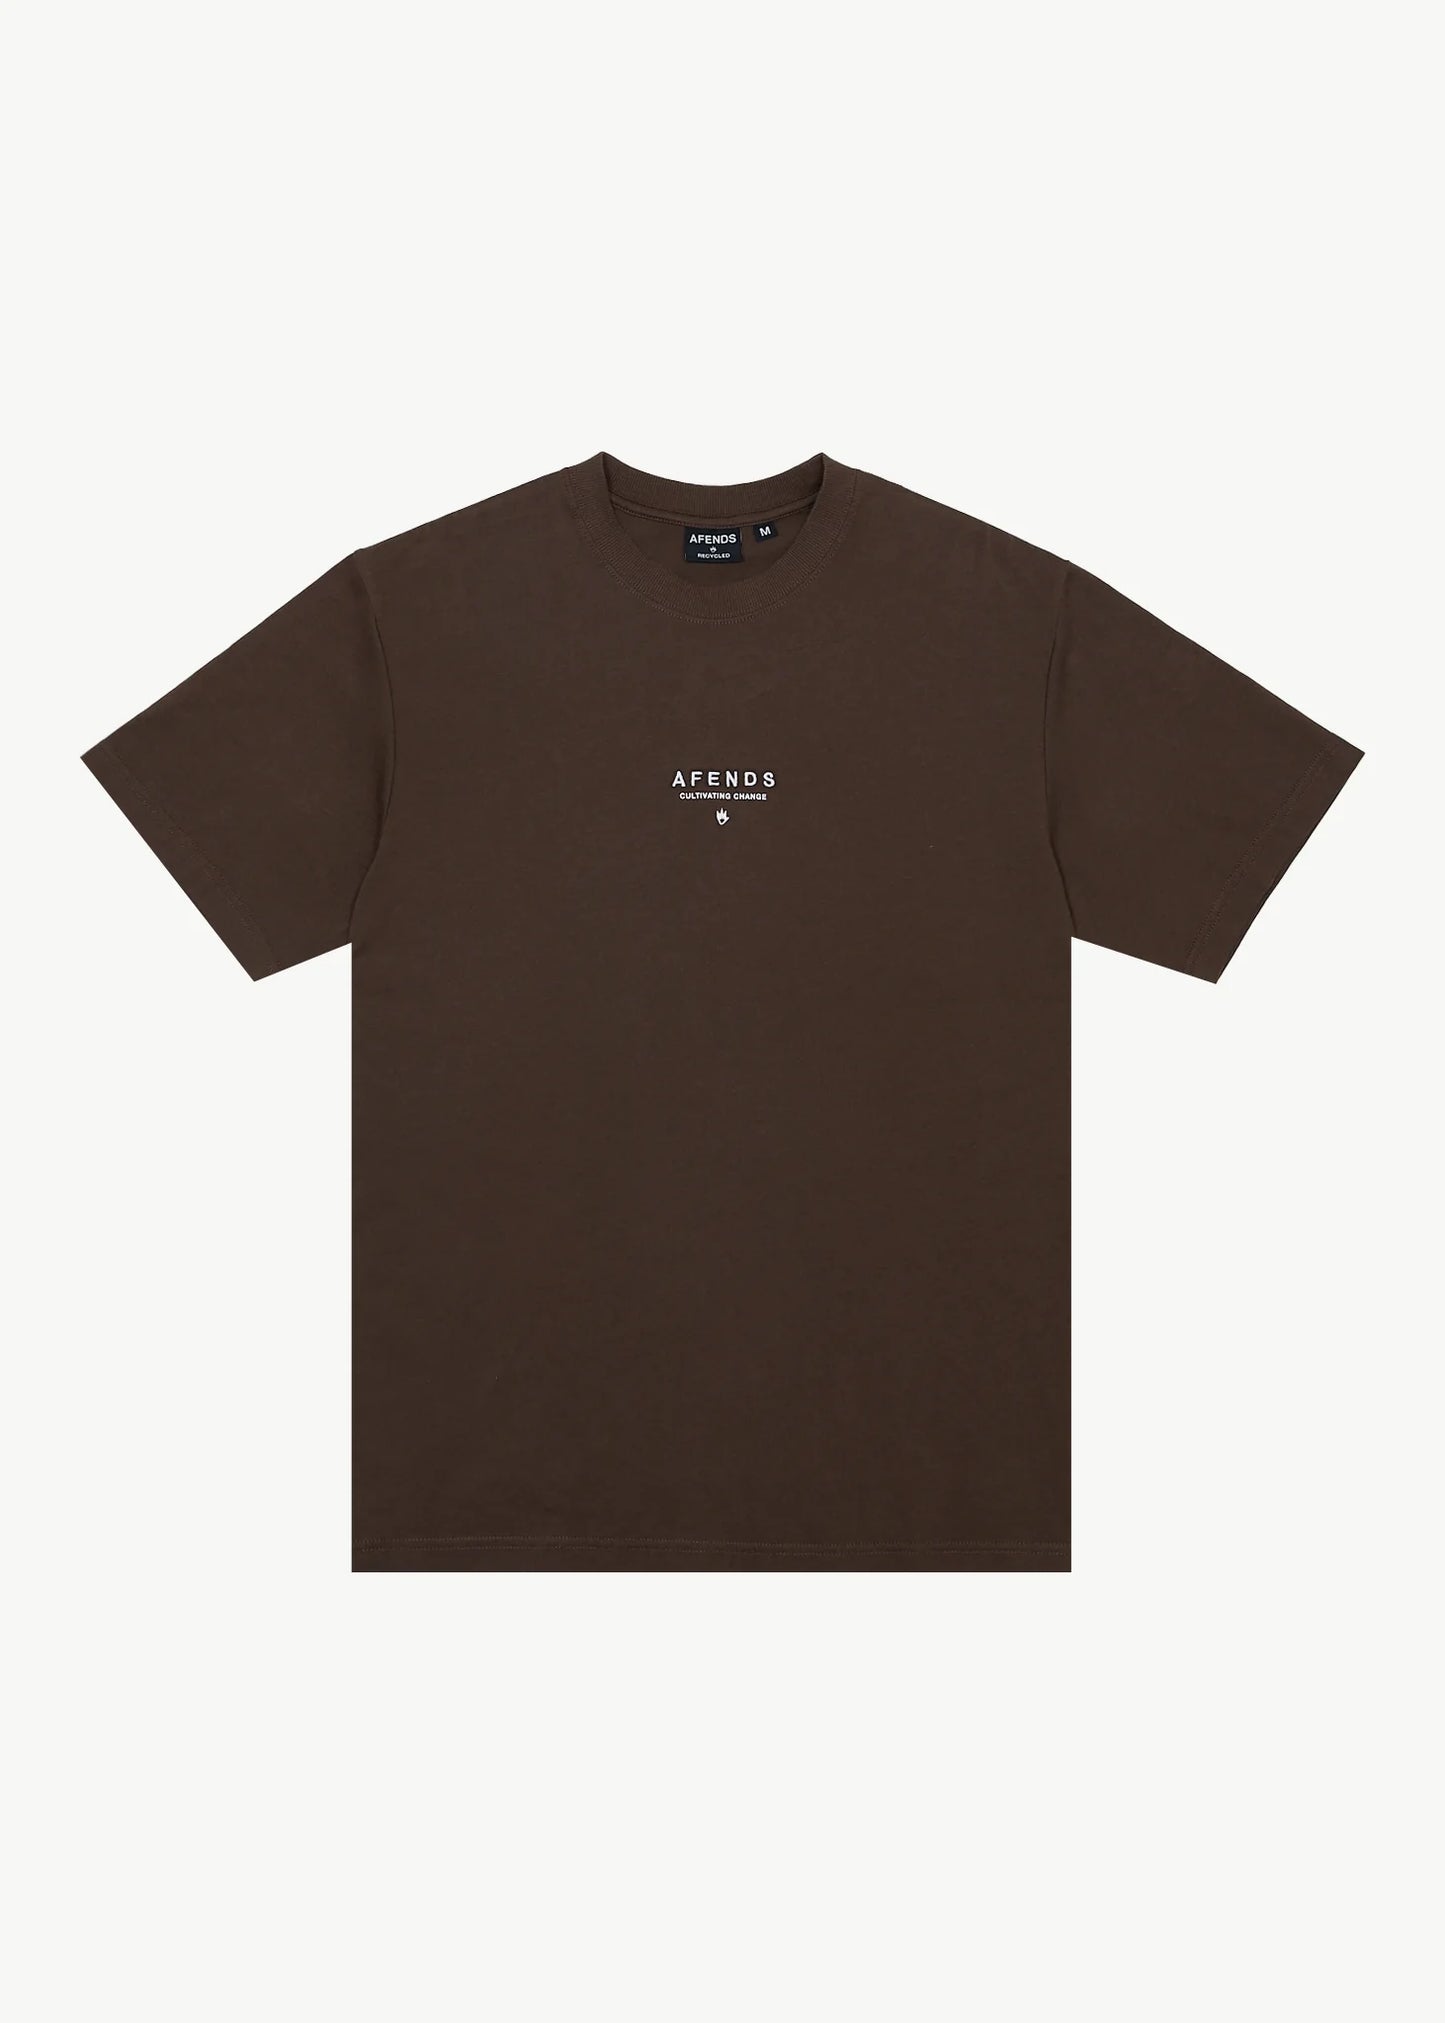 AFENDS Space Retro Fit Mens Tee - Coffee